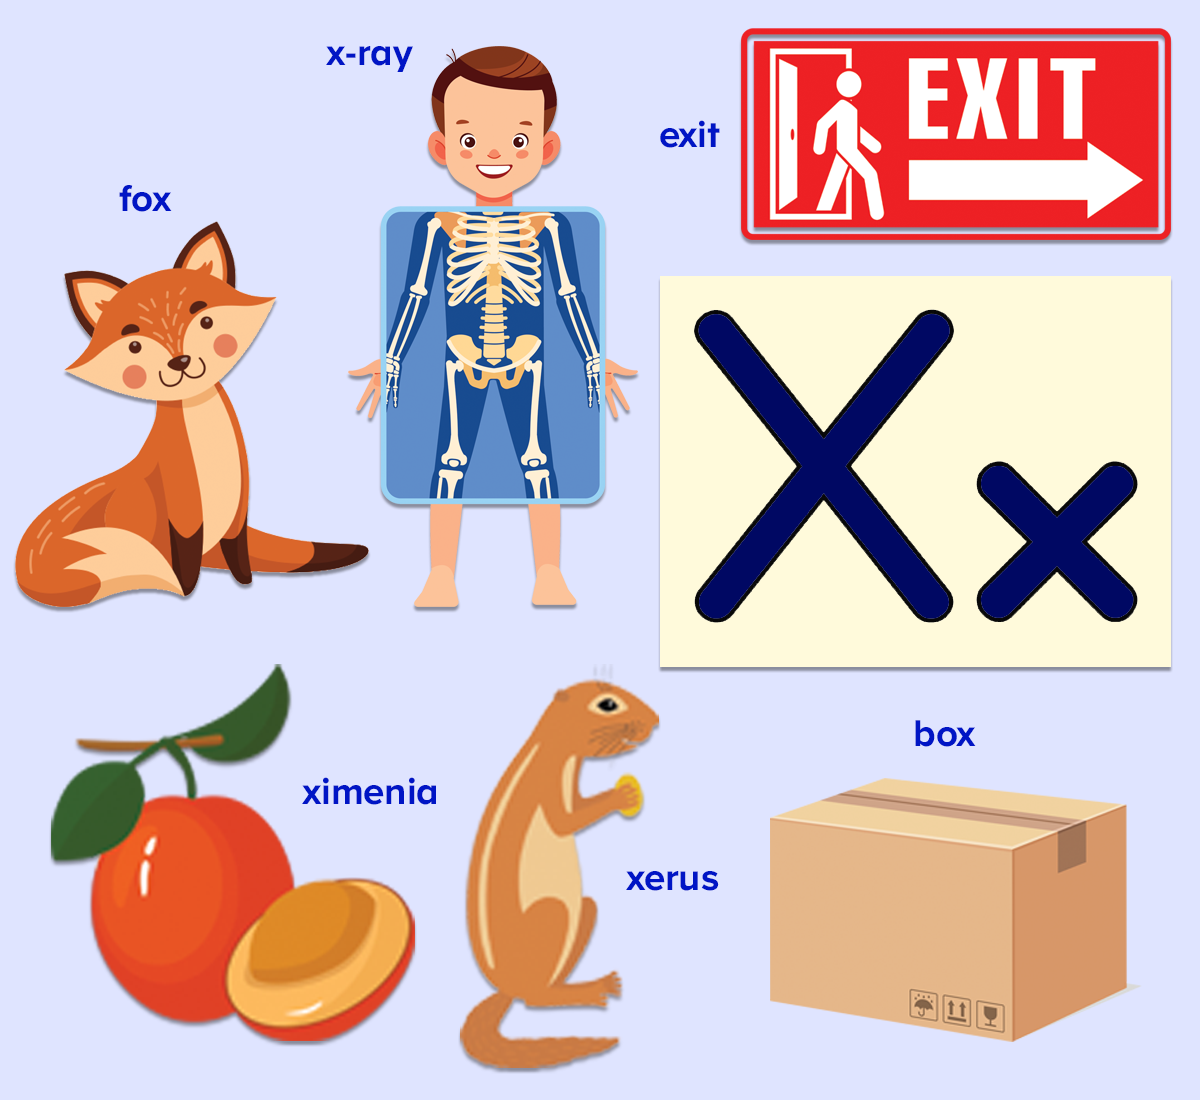 Free words that start with the letter x printable list for kids from ABCmouse.com.